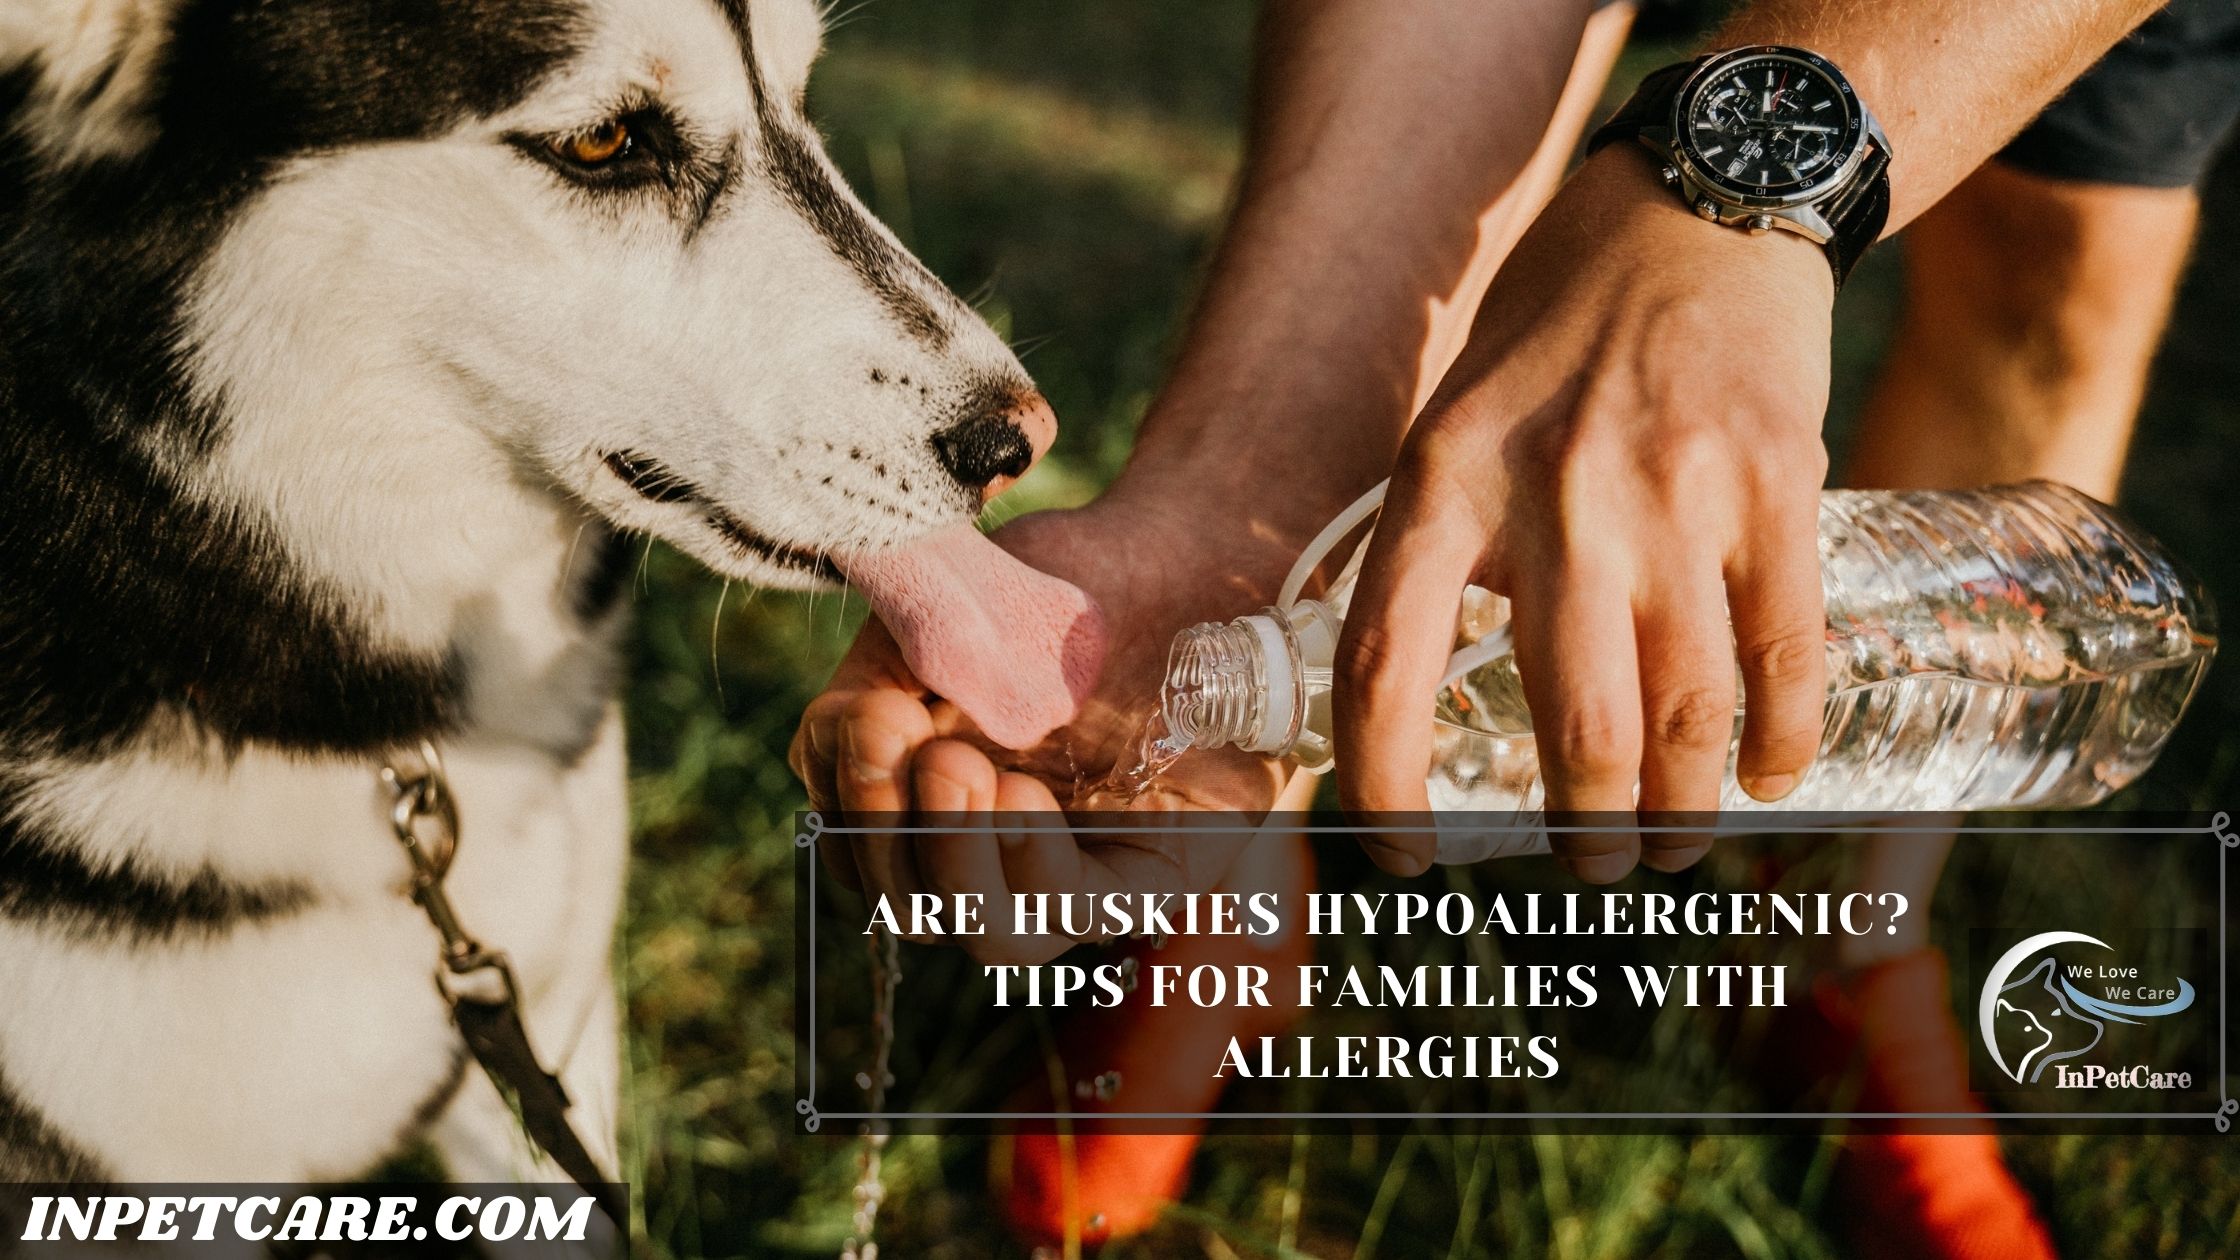 Are Huskies Hypoallergenic? Tips For Families With Allergies